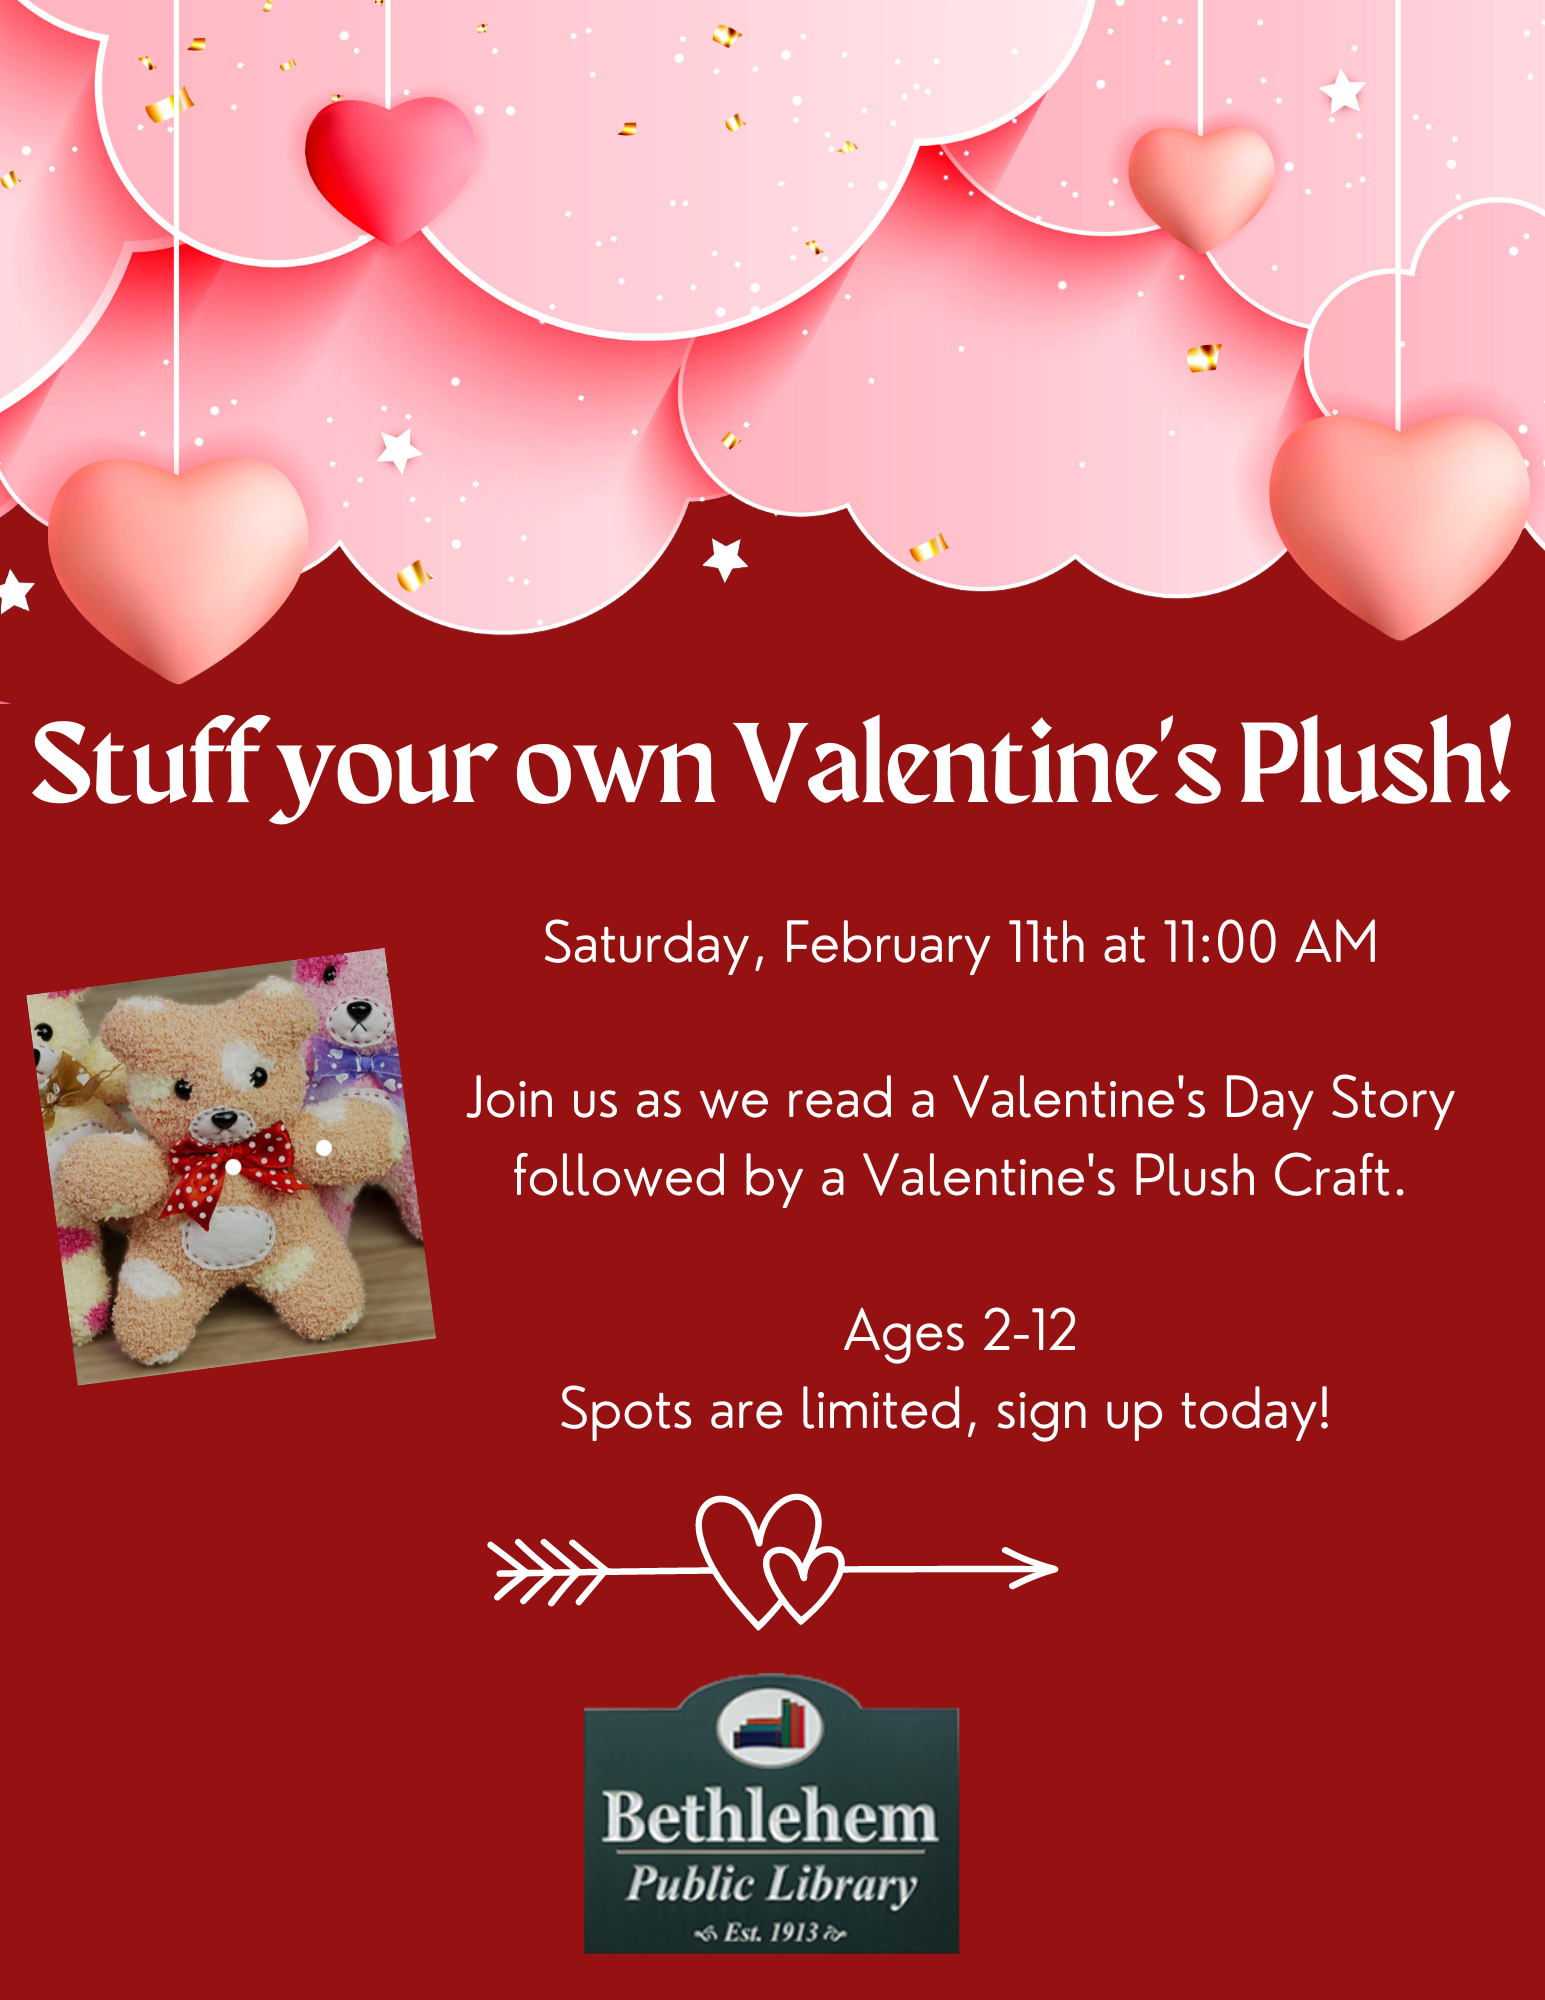 Stuff your own Valentine's plush. Saturday, February 11th at 11:00 AM  Join us as we read a Valentine's Day Story  followed by a Valentine's Plush Craft.   Ages 2-12.  Spots are limited, sign up today